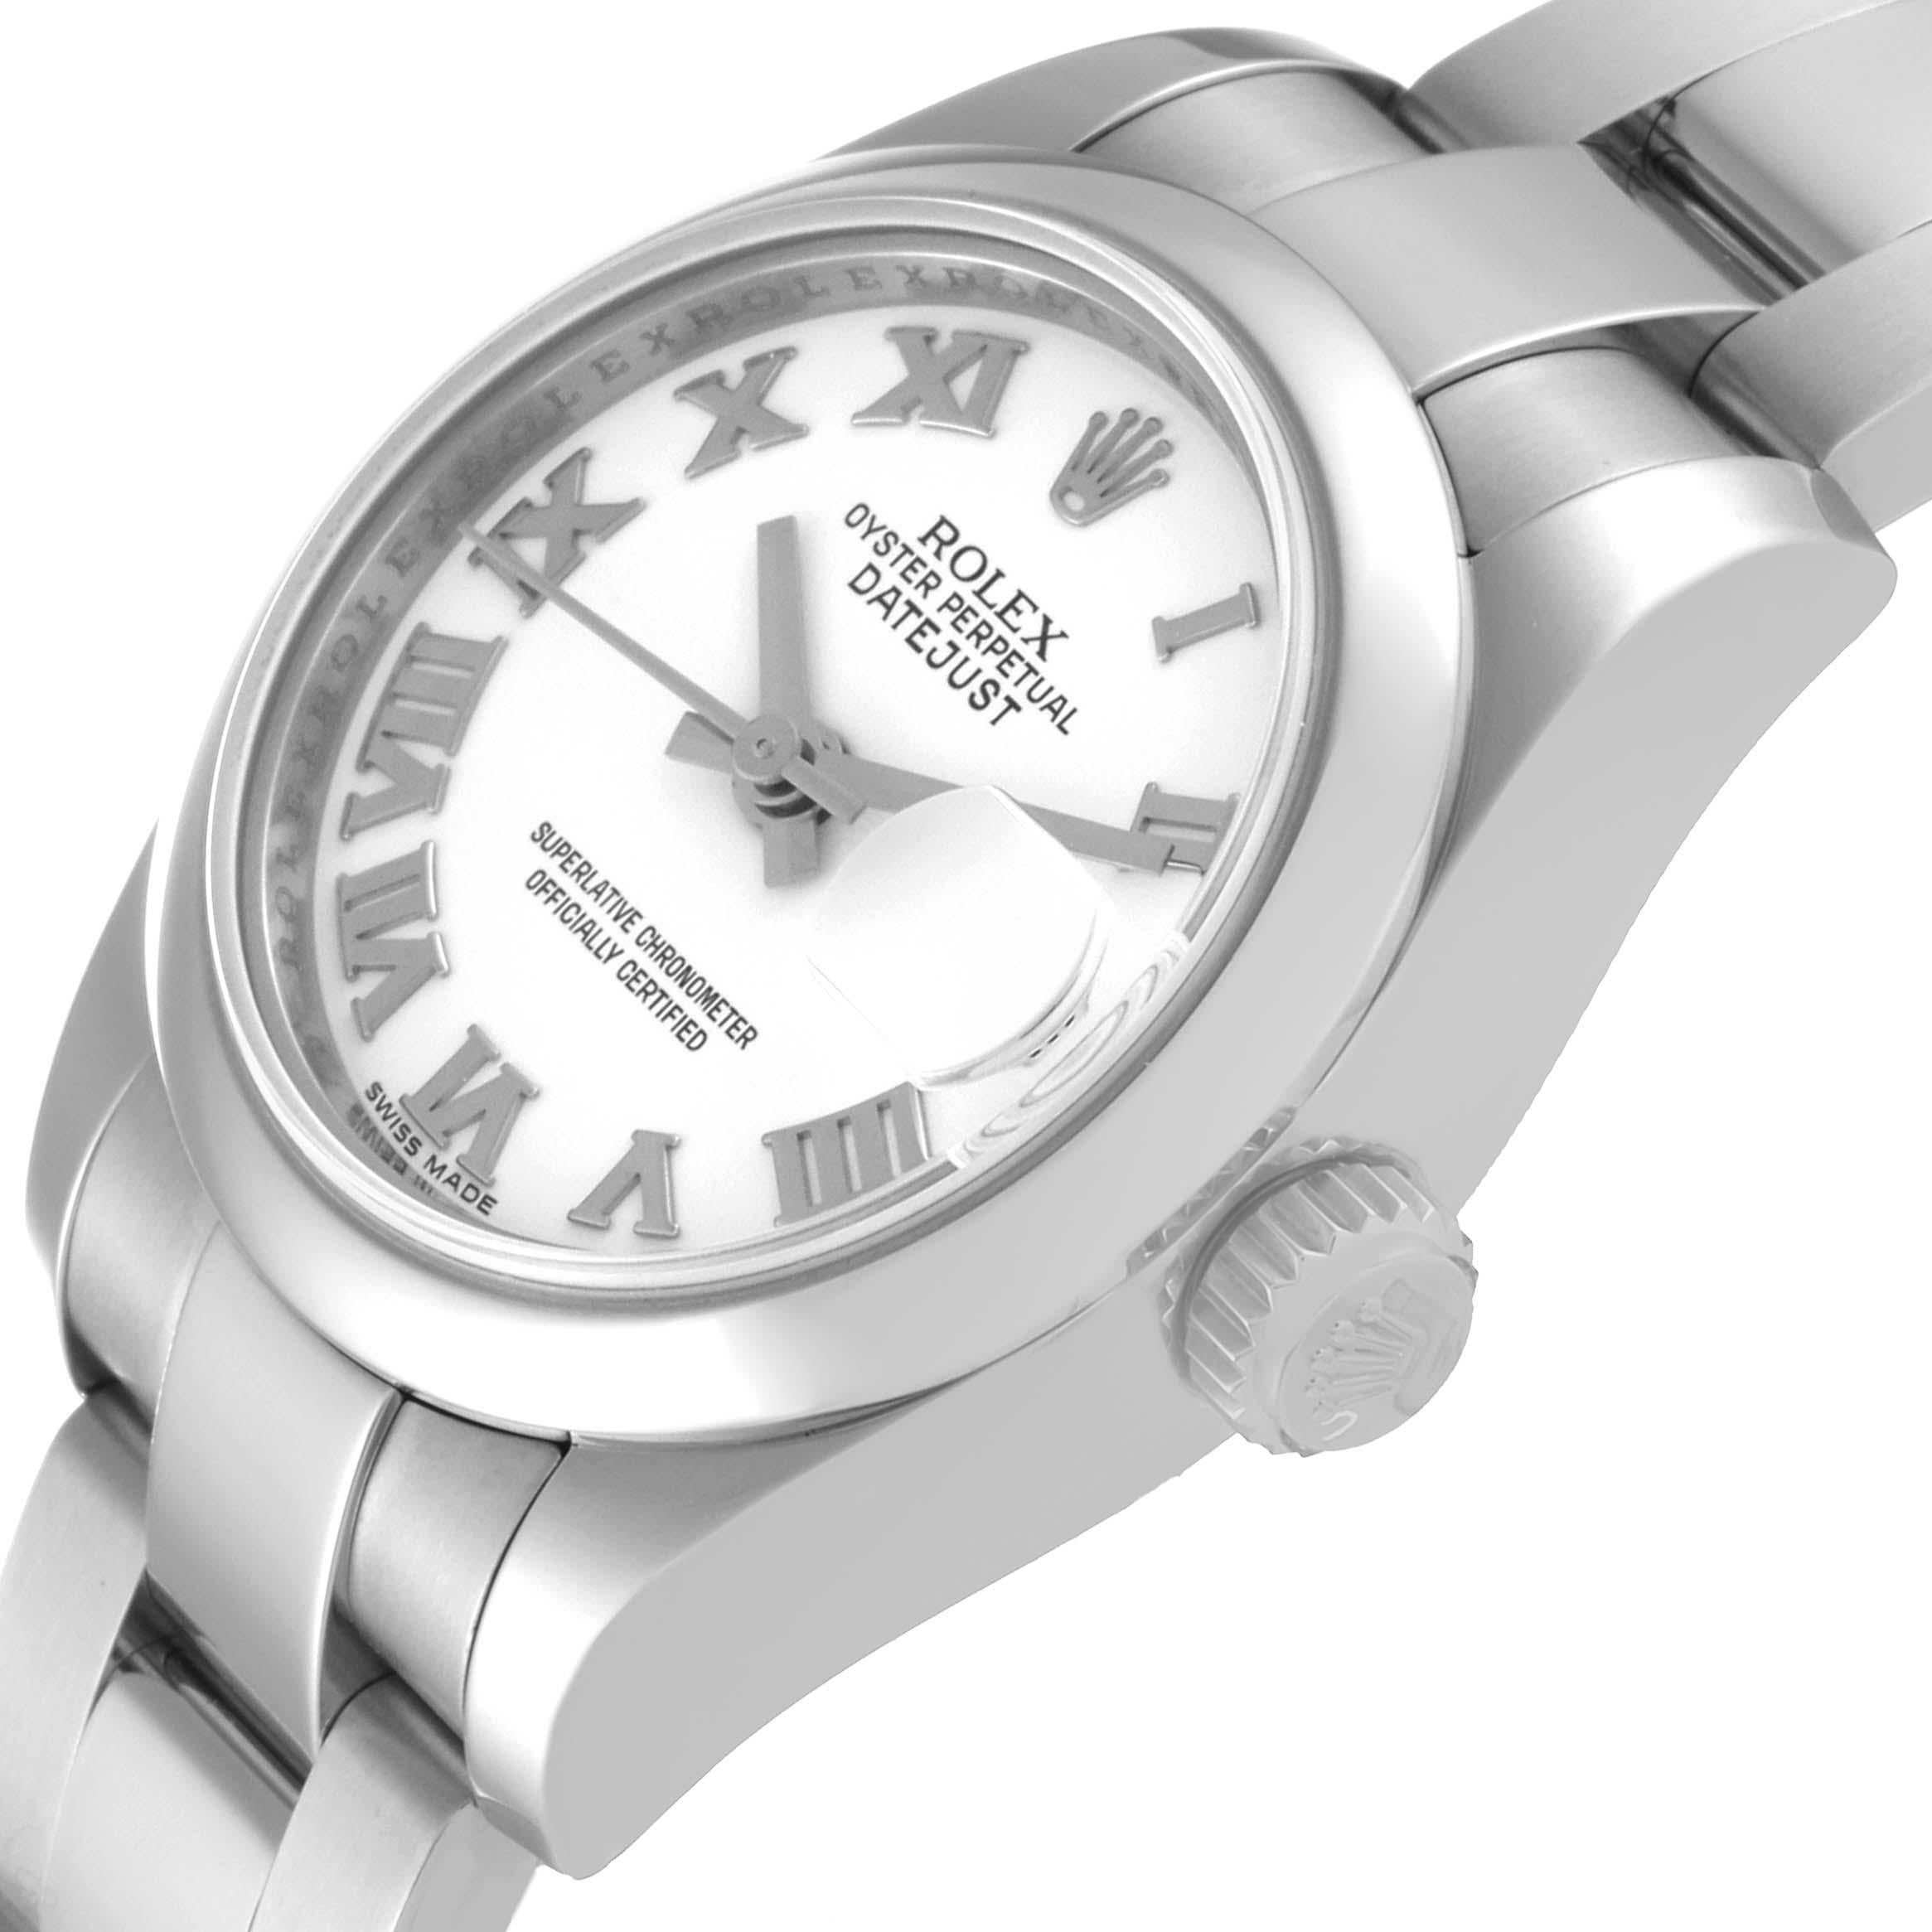 Rolex Datejust 26 White Dial Oyster Bracelet Steel Ladies Watch 179160. Officially certified chronometer self-winding movement with quickset date function. Stainless steel oyster case 26 mm in diameter. Rolex logo on a crown. Stainless steel smooth